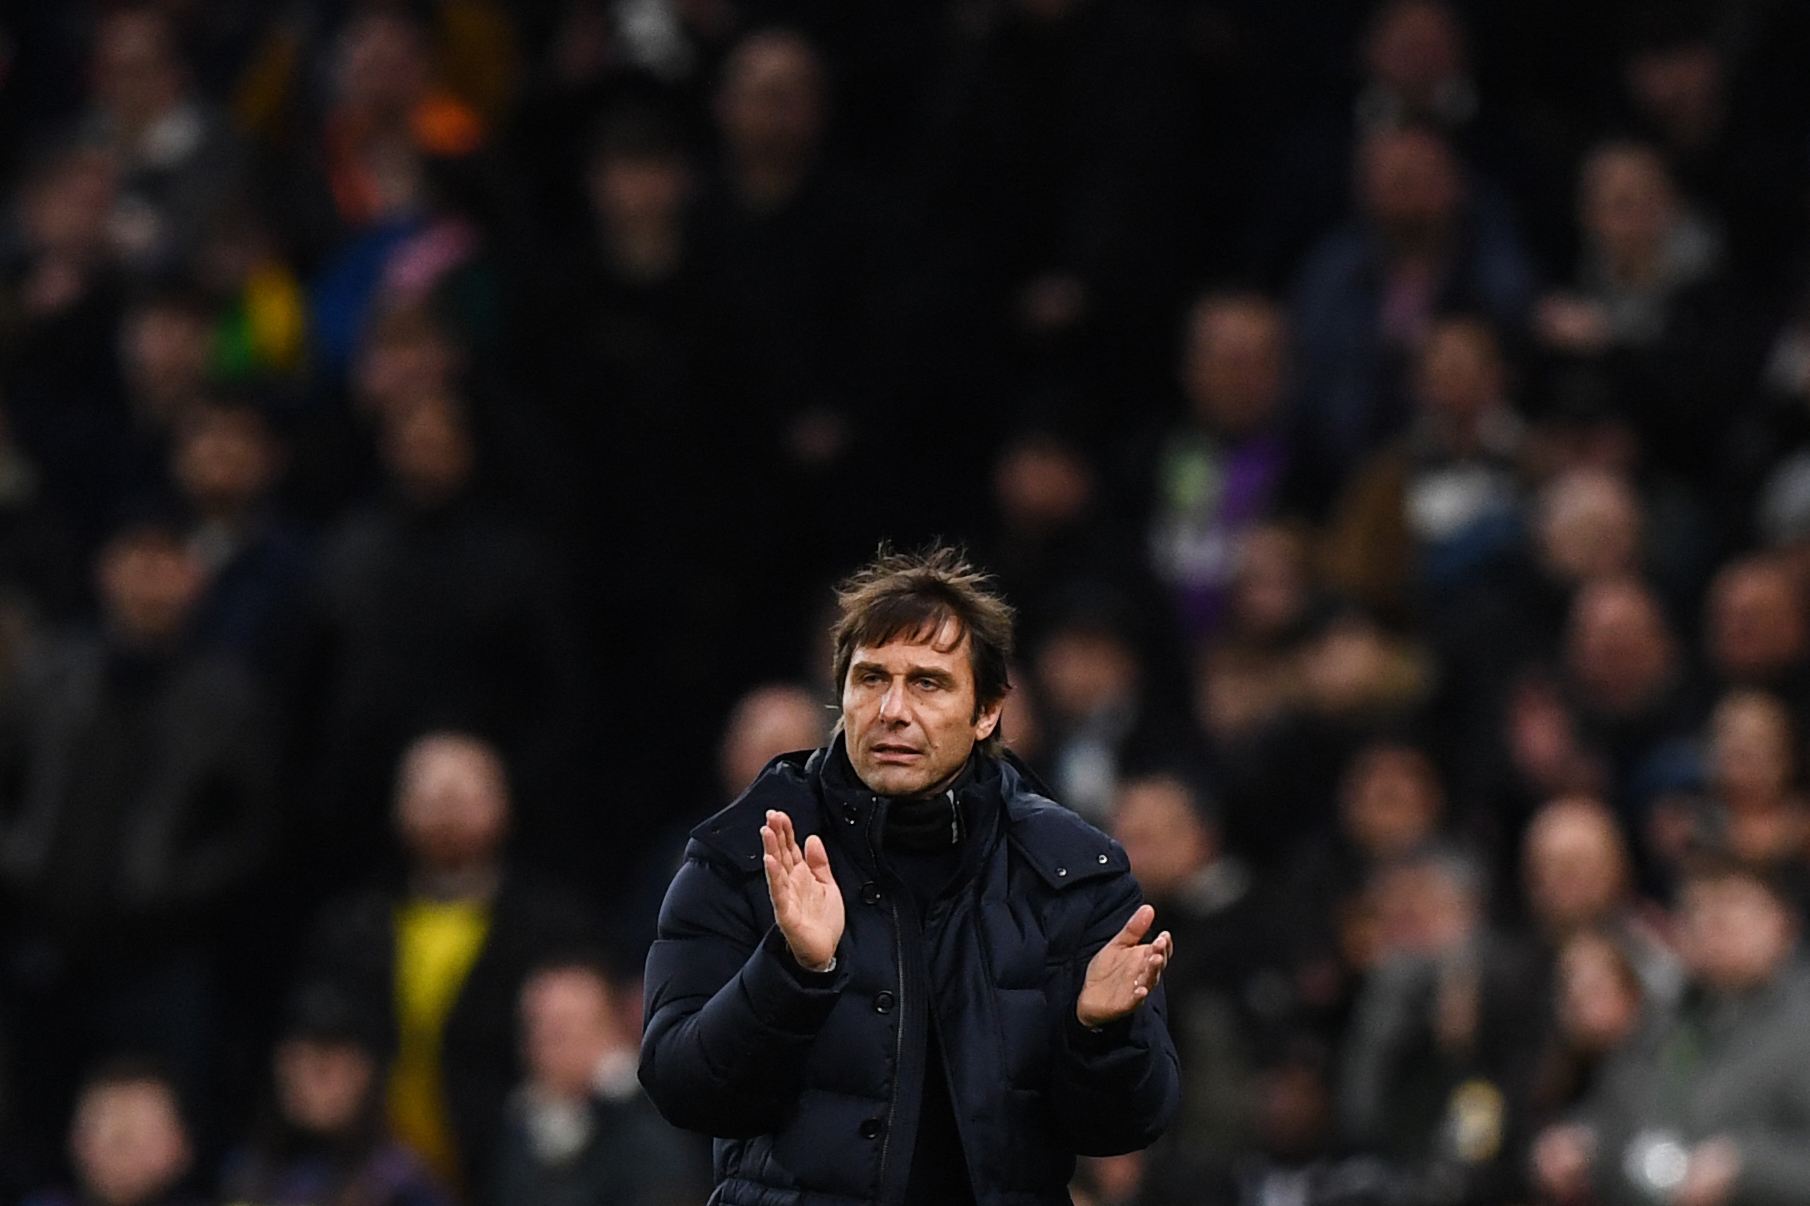 Antonio Conte in action on the sidelines. (Photo by DANIEL LEAL/AFP via Getty Images)